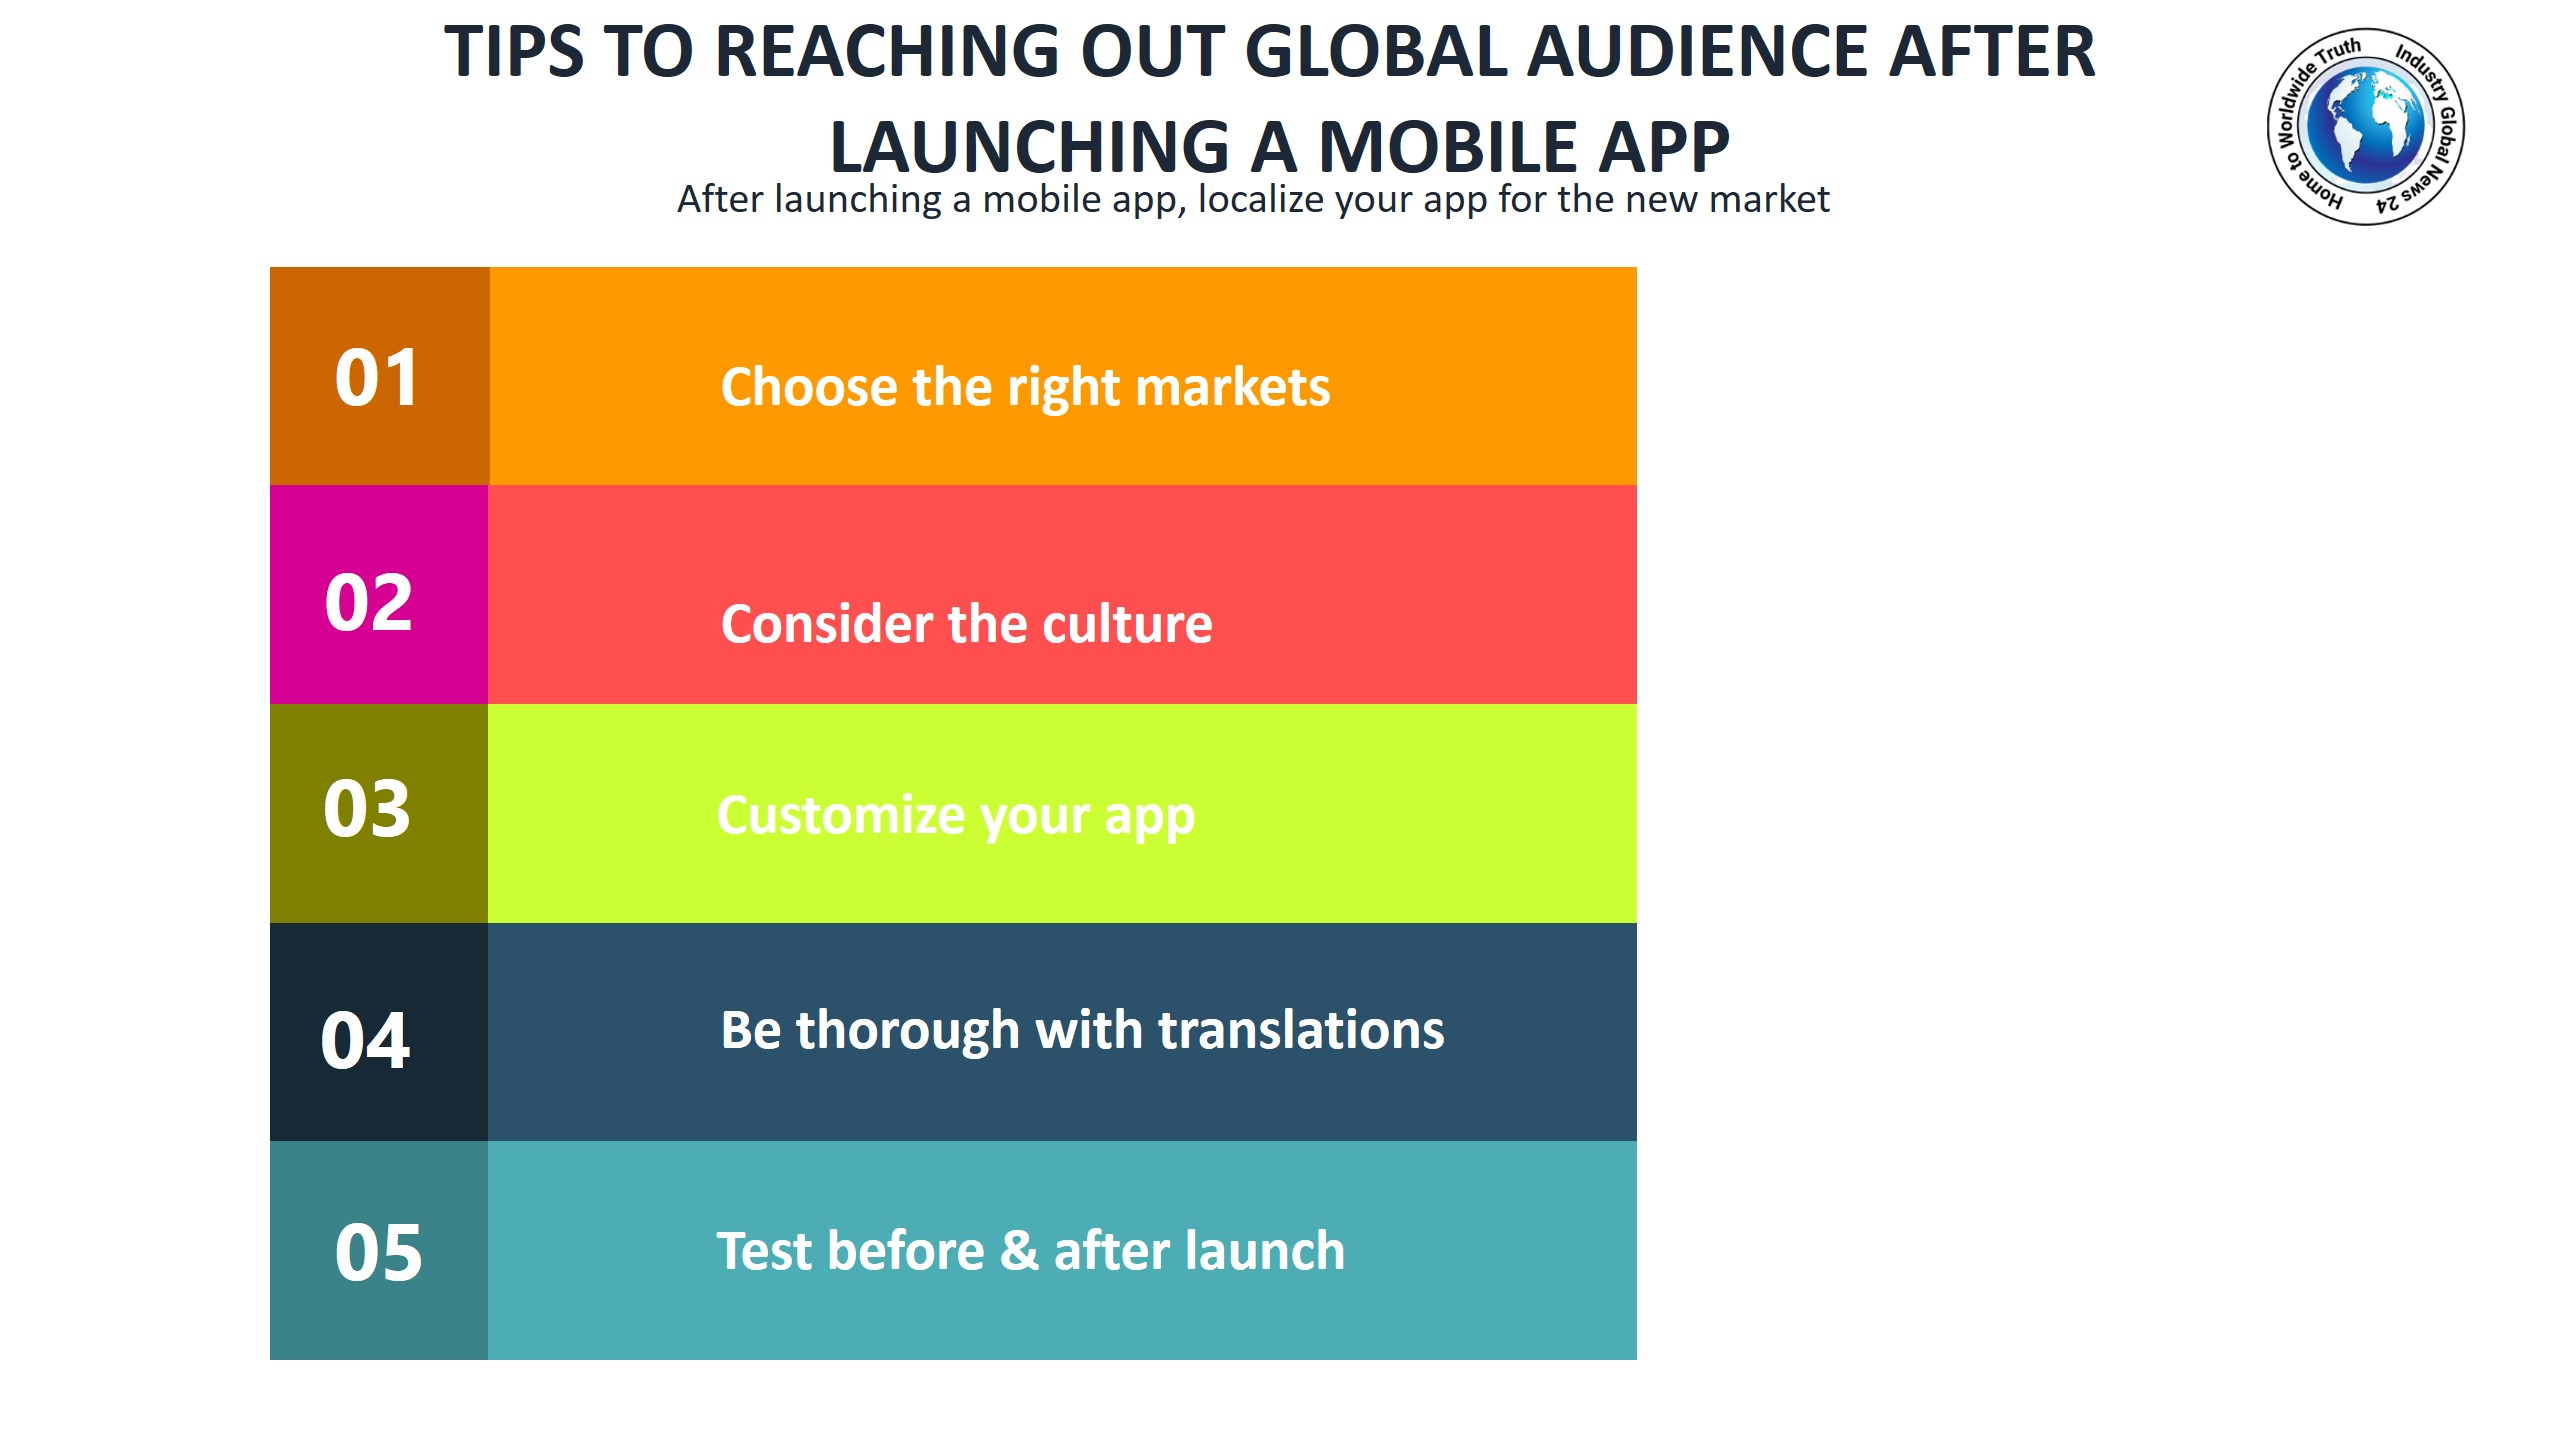 Tips to reaching out global audience after launching a mobile app